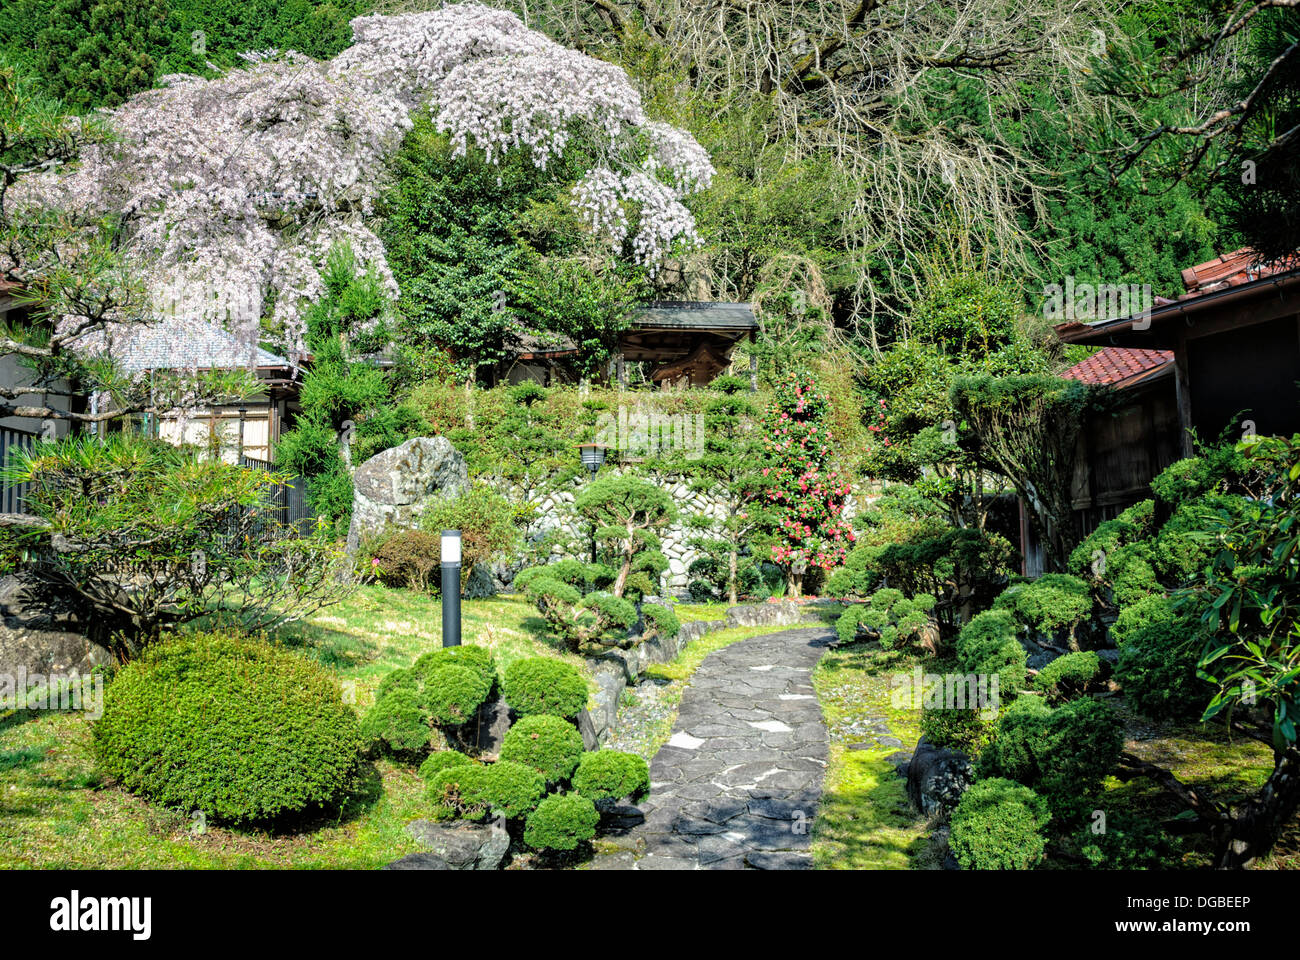 Ornate, traditional Japanese garden with cherry blossom (sakura) and topiary bushes. Stock Photo